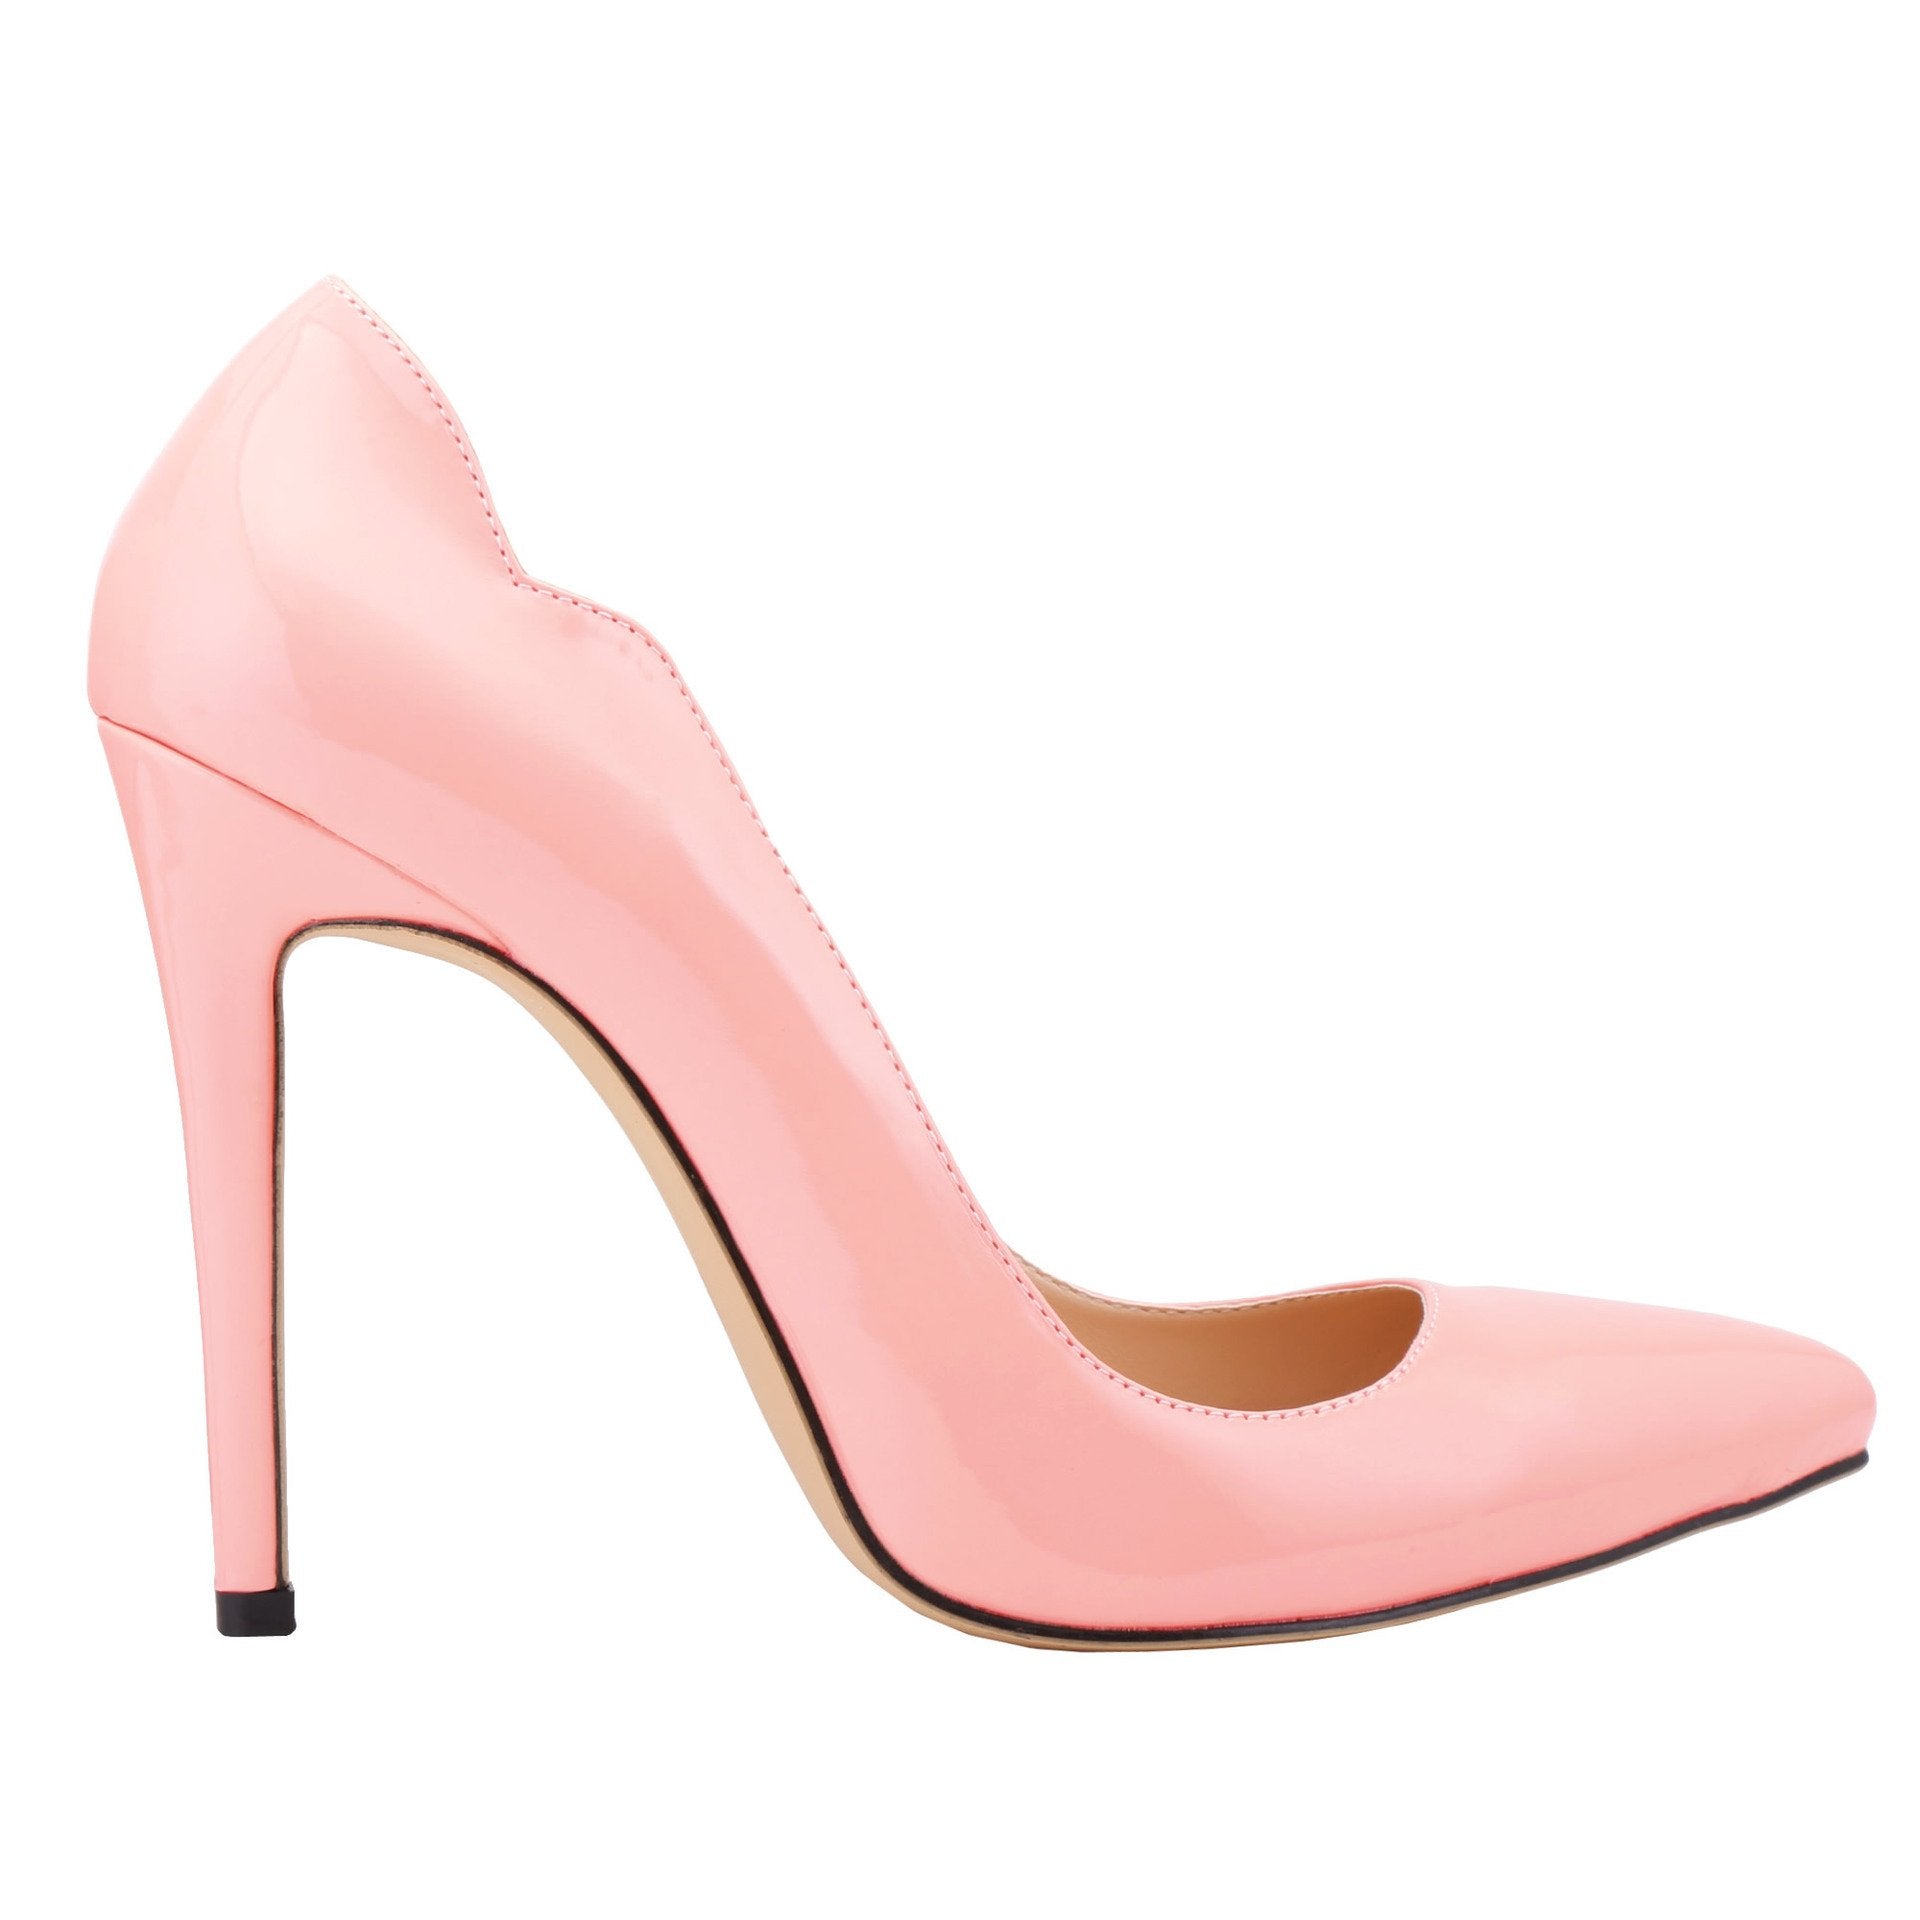 Sexy Candy Colors Pointed Stiletto Heel Heels Shoes